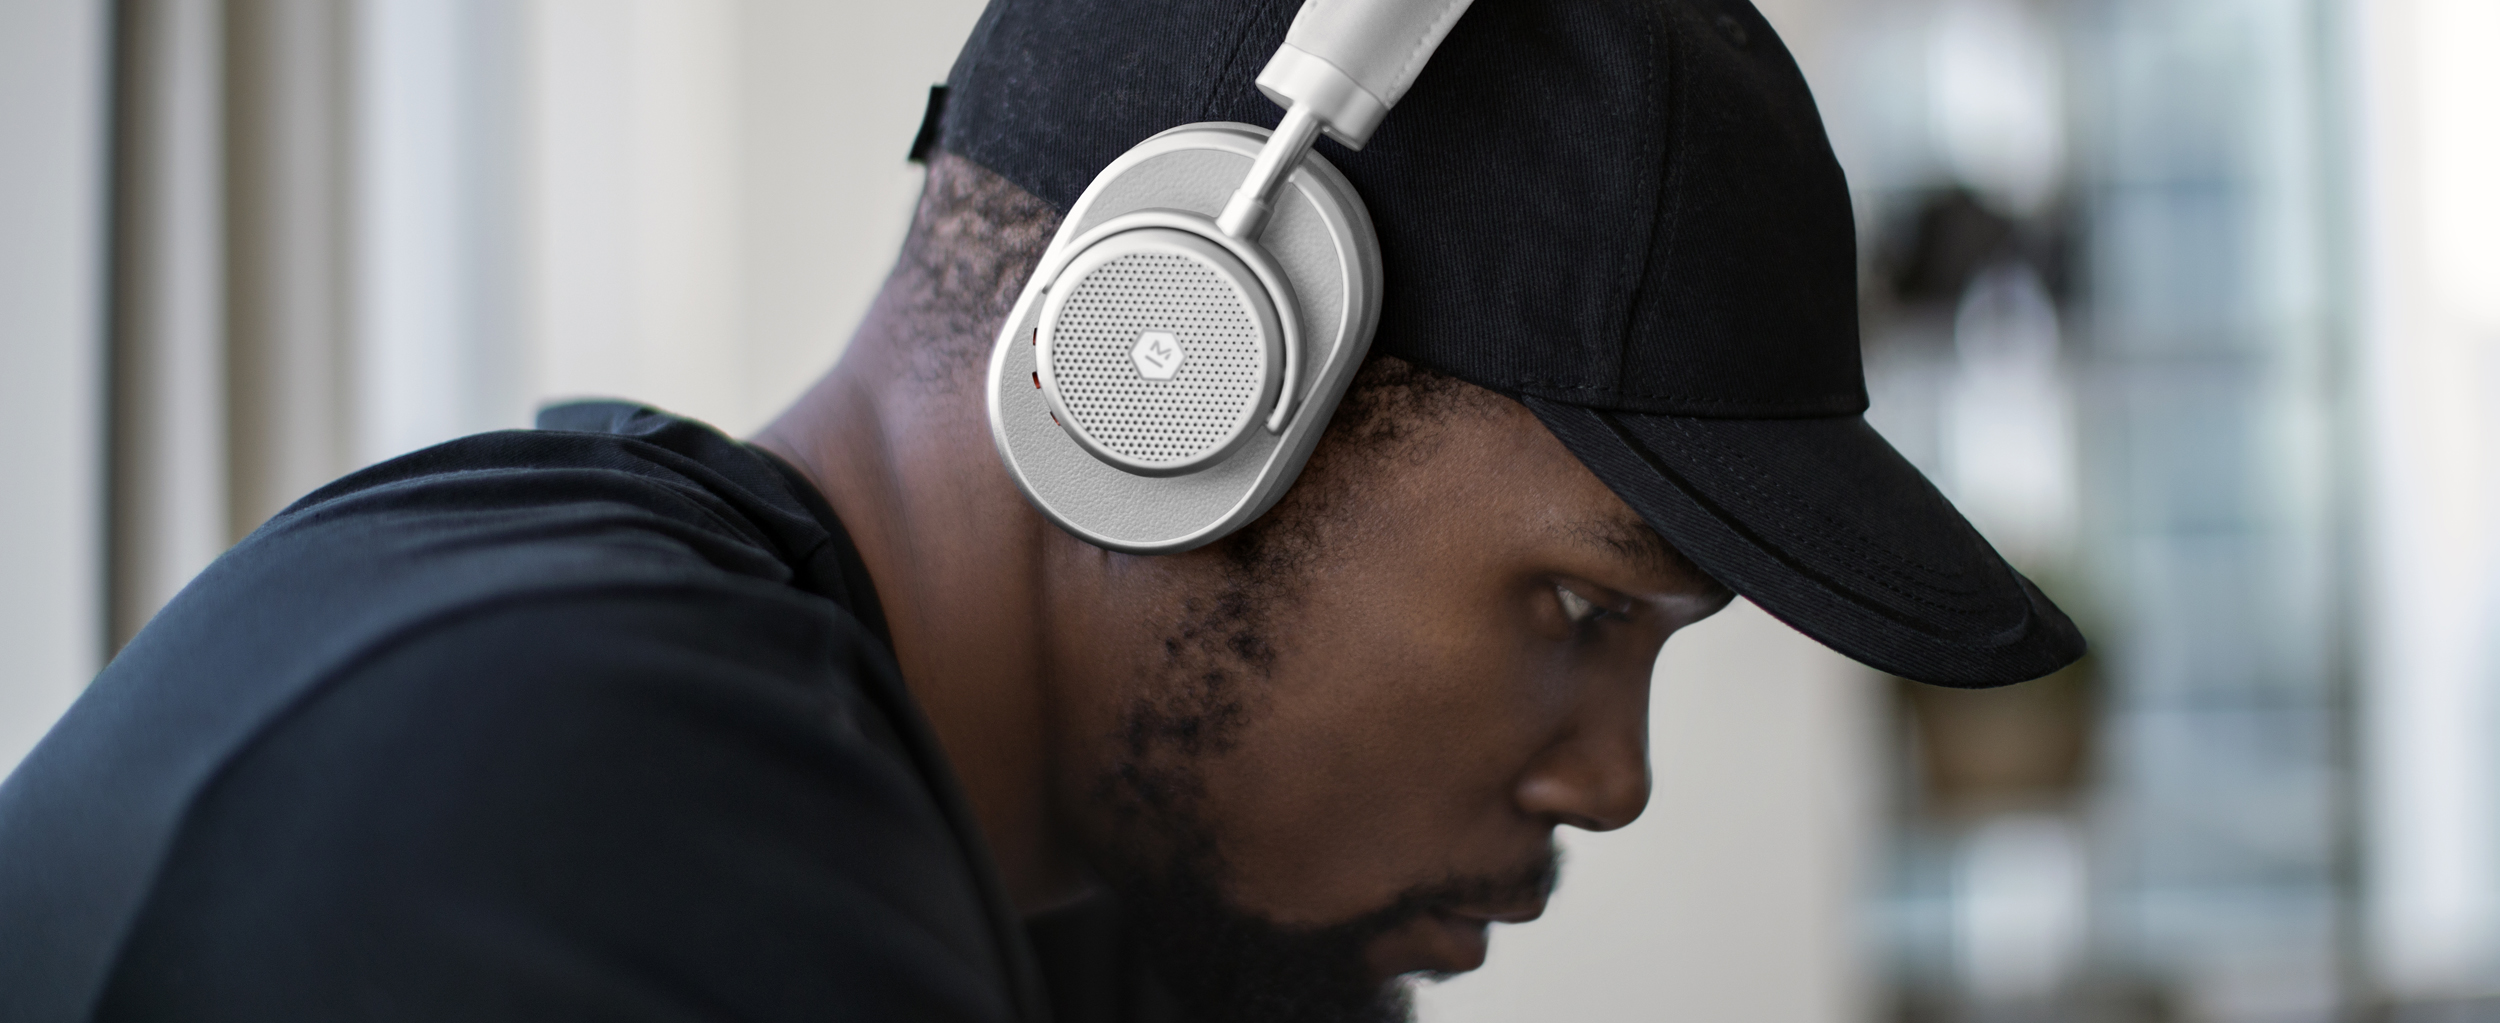 Introducing The Kevin Durant Studio 35 MW65 Active Noise-Cancelling Wireless Over-Ear Headphones